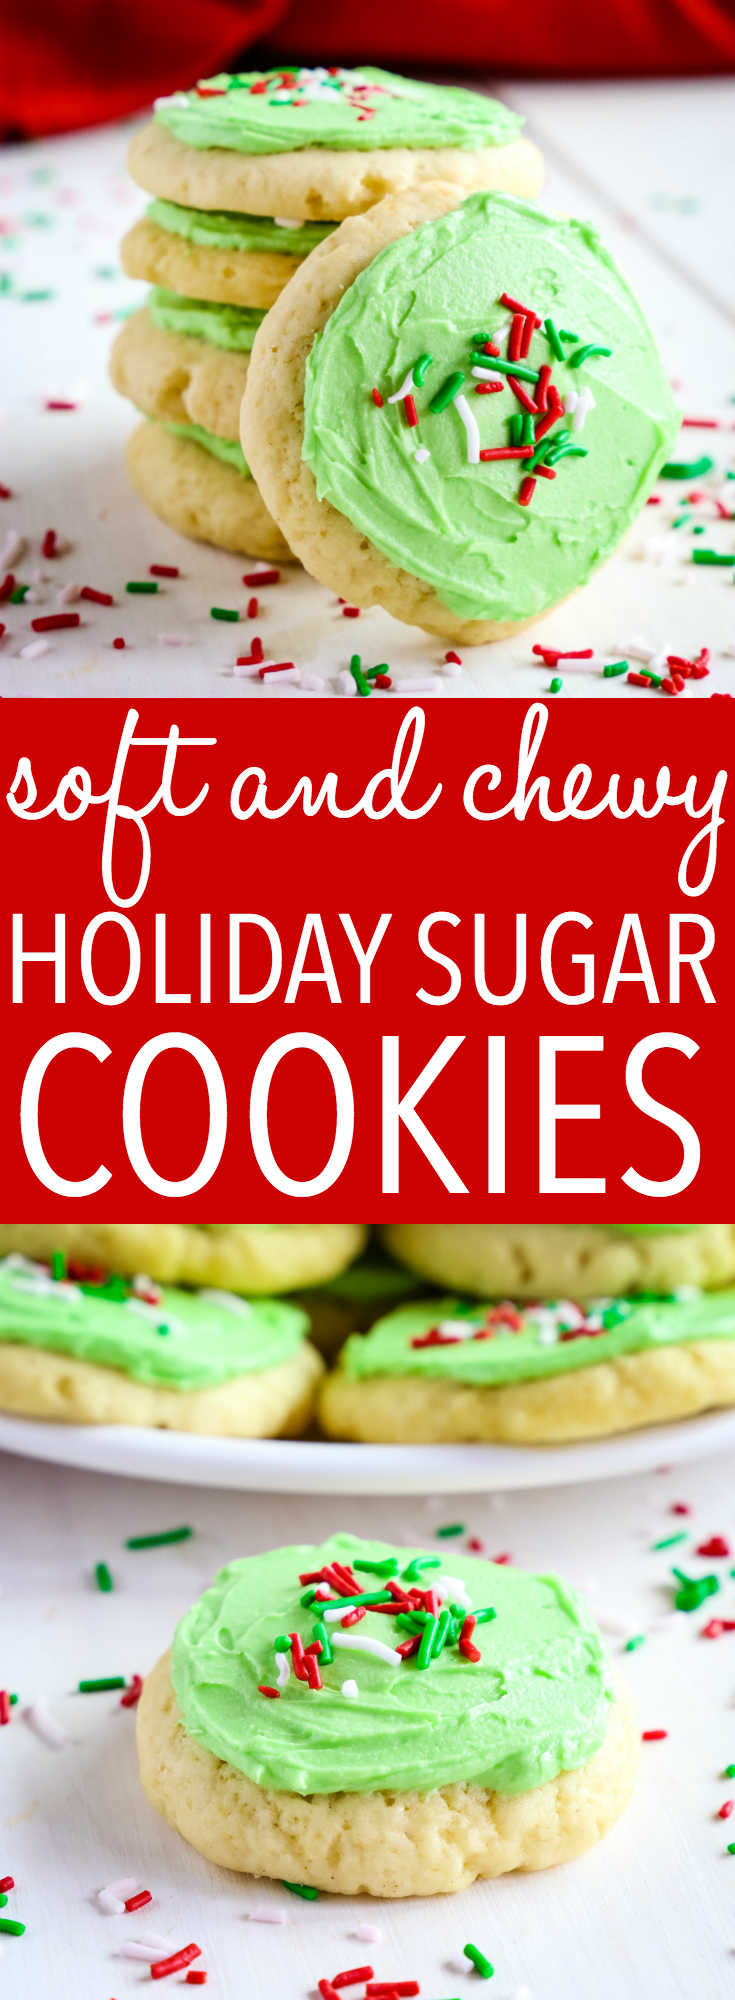 These Soft and Chewy Christmas Frosted Sugar Cookies are the perfect sweet treat that's easy to make and tastes just like your favourite Lofthouse sugar cookies! Recipe from thebusybaker.ca! #cookies #christmas #sugarcookies #frostedcookies #holiday #thanksgiving #christmascookies #sprinkles #christmascraft #easyrecipe #easychristmasrecipe via @busybakerblog